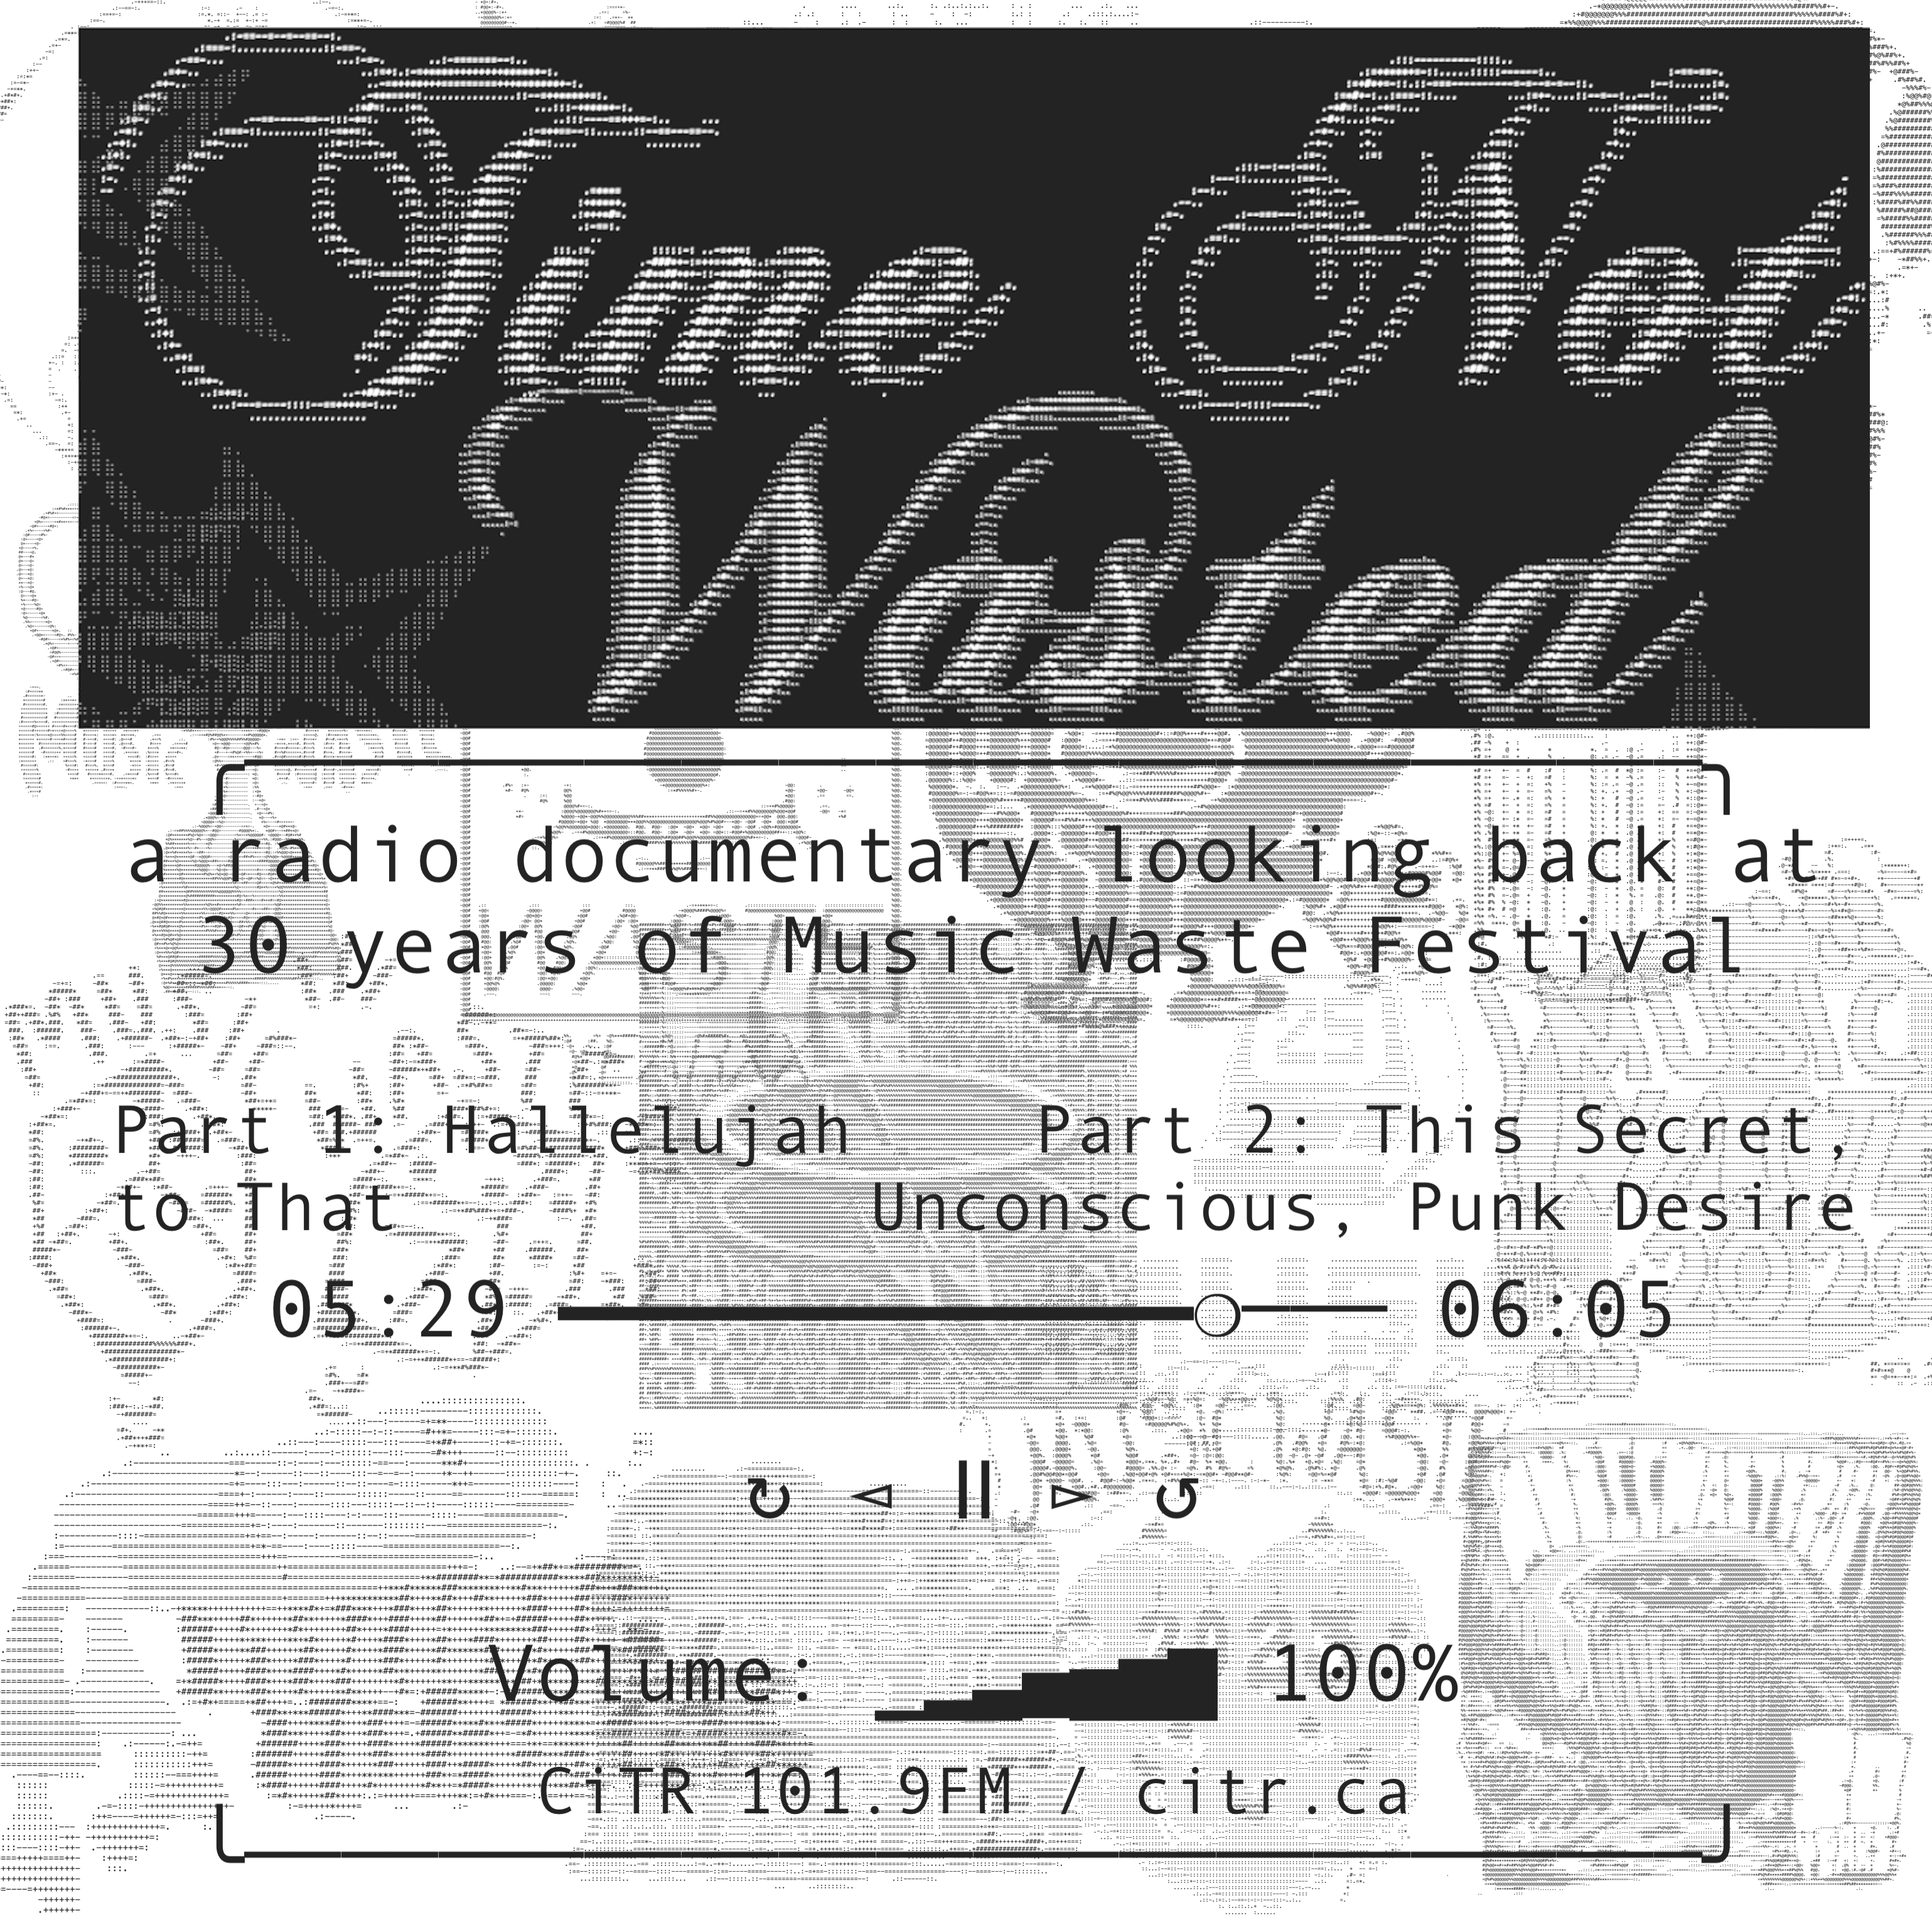 text reads: TIME NOT WASTED: a radio documentary looking back at 30 years of Music Waste Festival. Part 1: Hallelujah to That, 05:29. Part 2: This Secret, Unconscious, Punk Desire, 06:05. Against a background with ASCII versions of Music Waste logos 2004-2024.